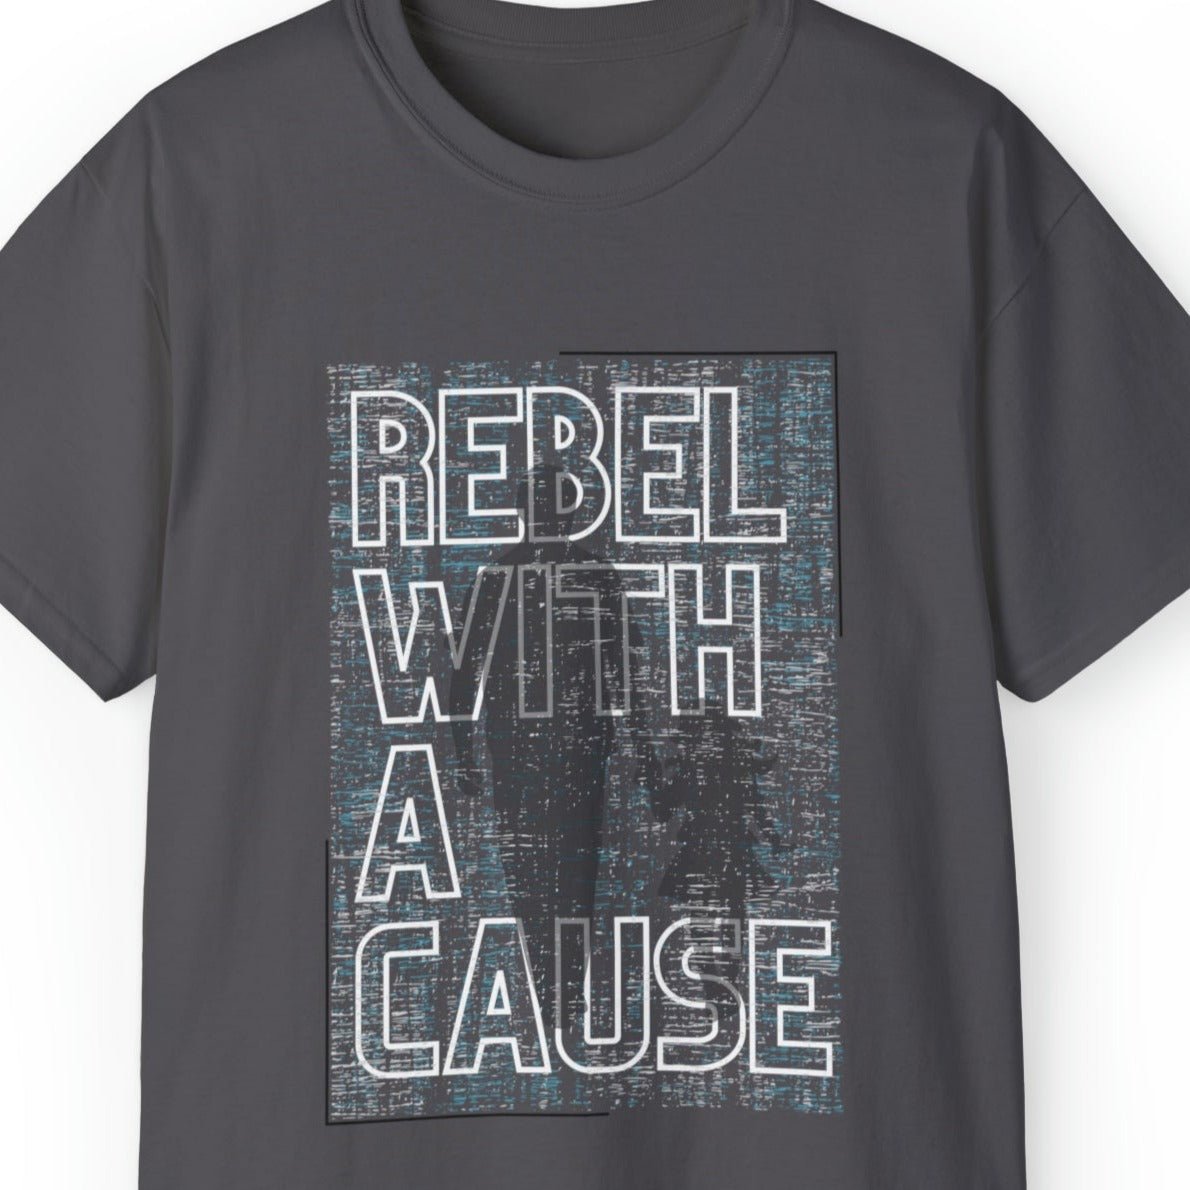 Rebel with a Cause Men's Tee: Father-Daughter Bonding Statement - Eddy and Rita